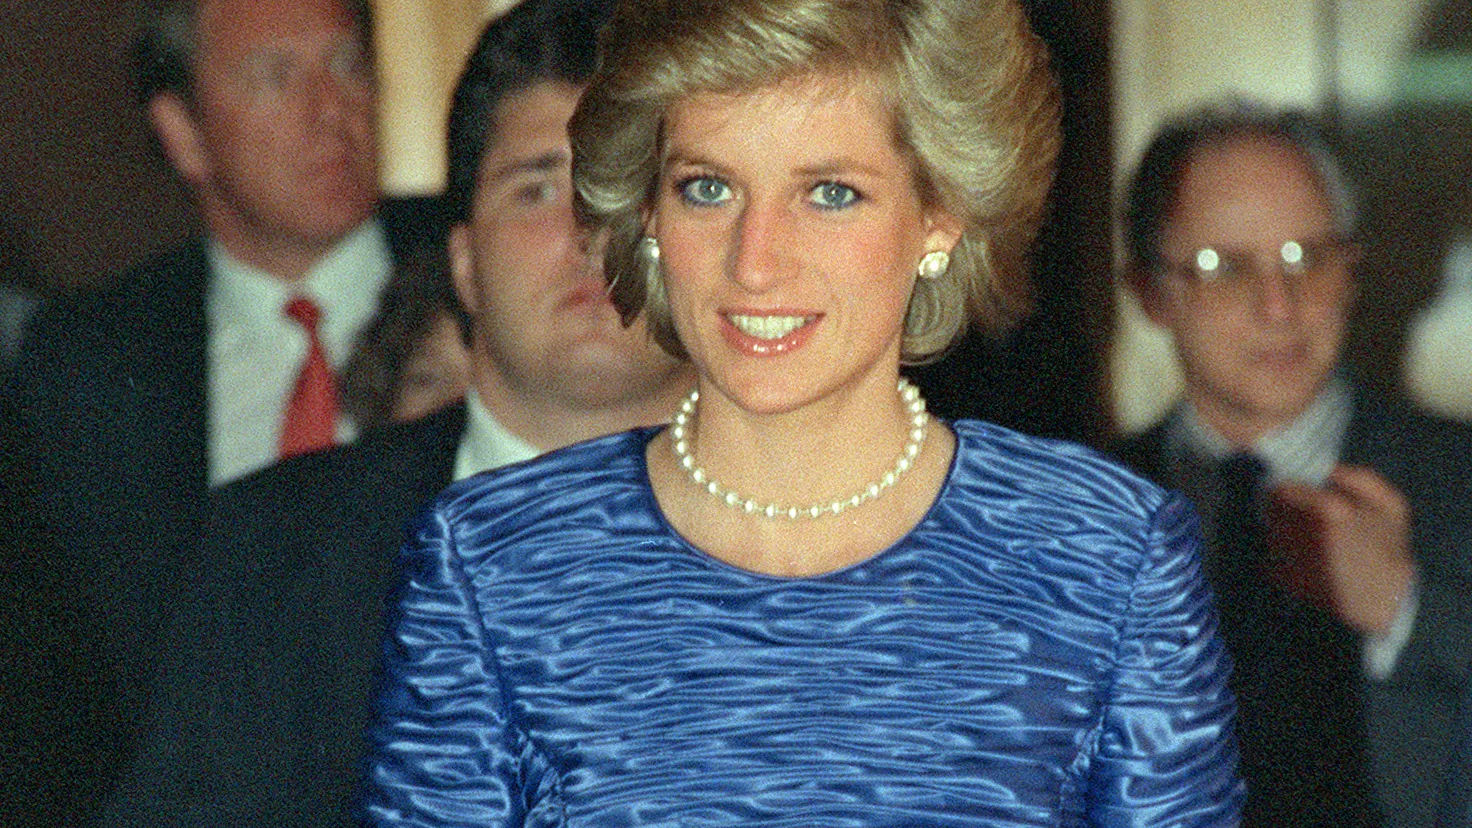 What Princess Diana said in 1995 interview that upset the Royal Family